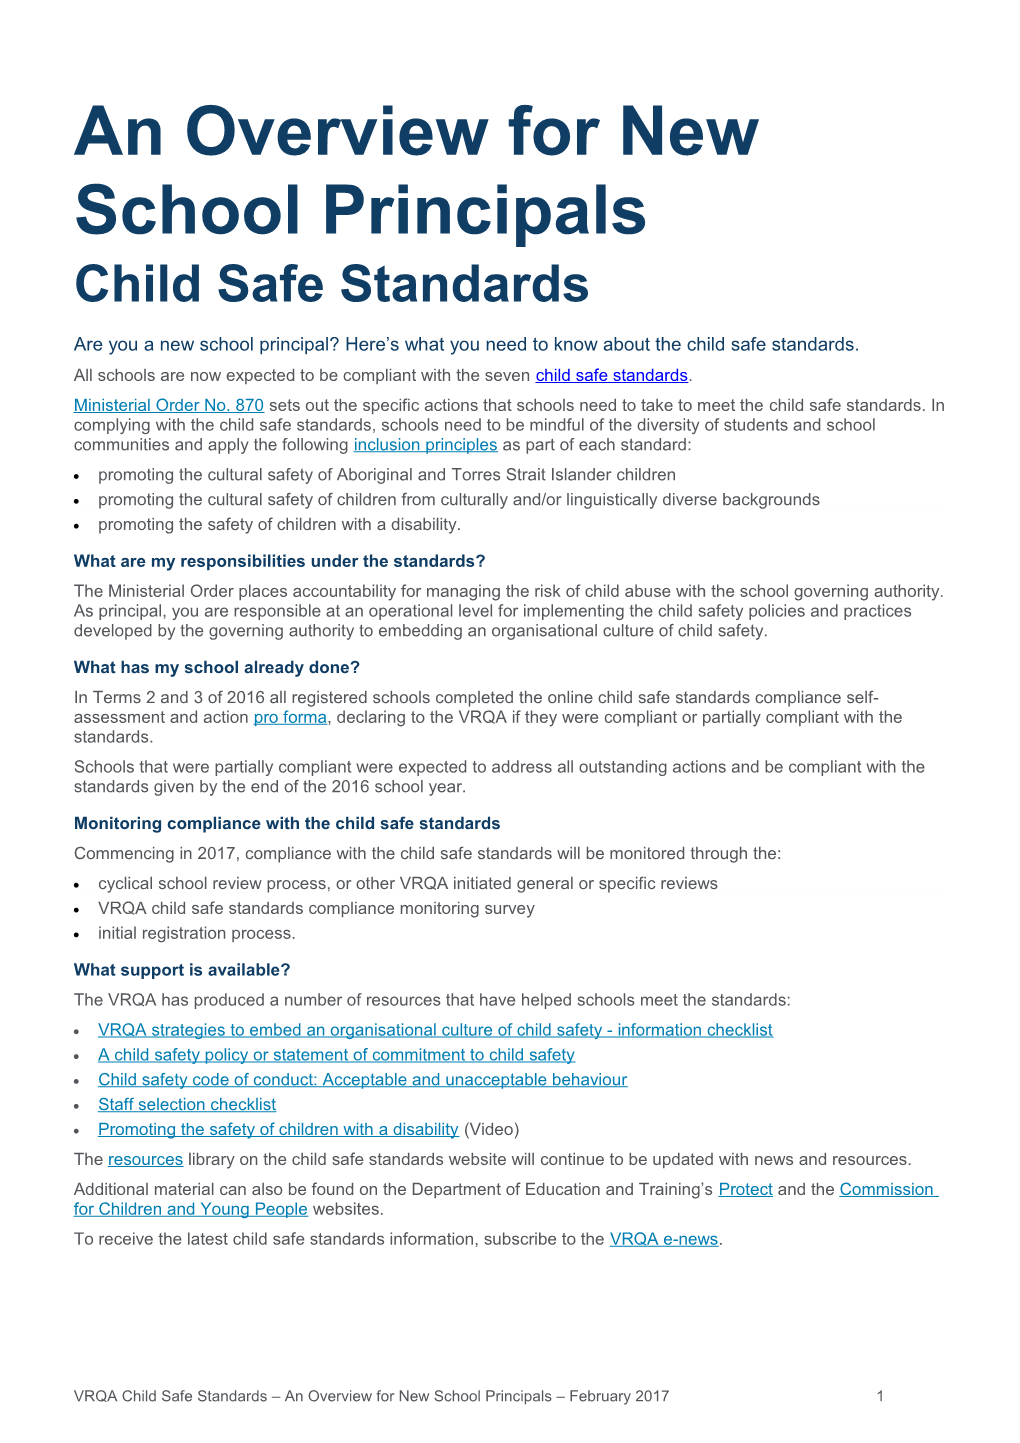 Child Safe Standards: an Overview for New School Principals